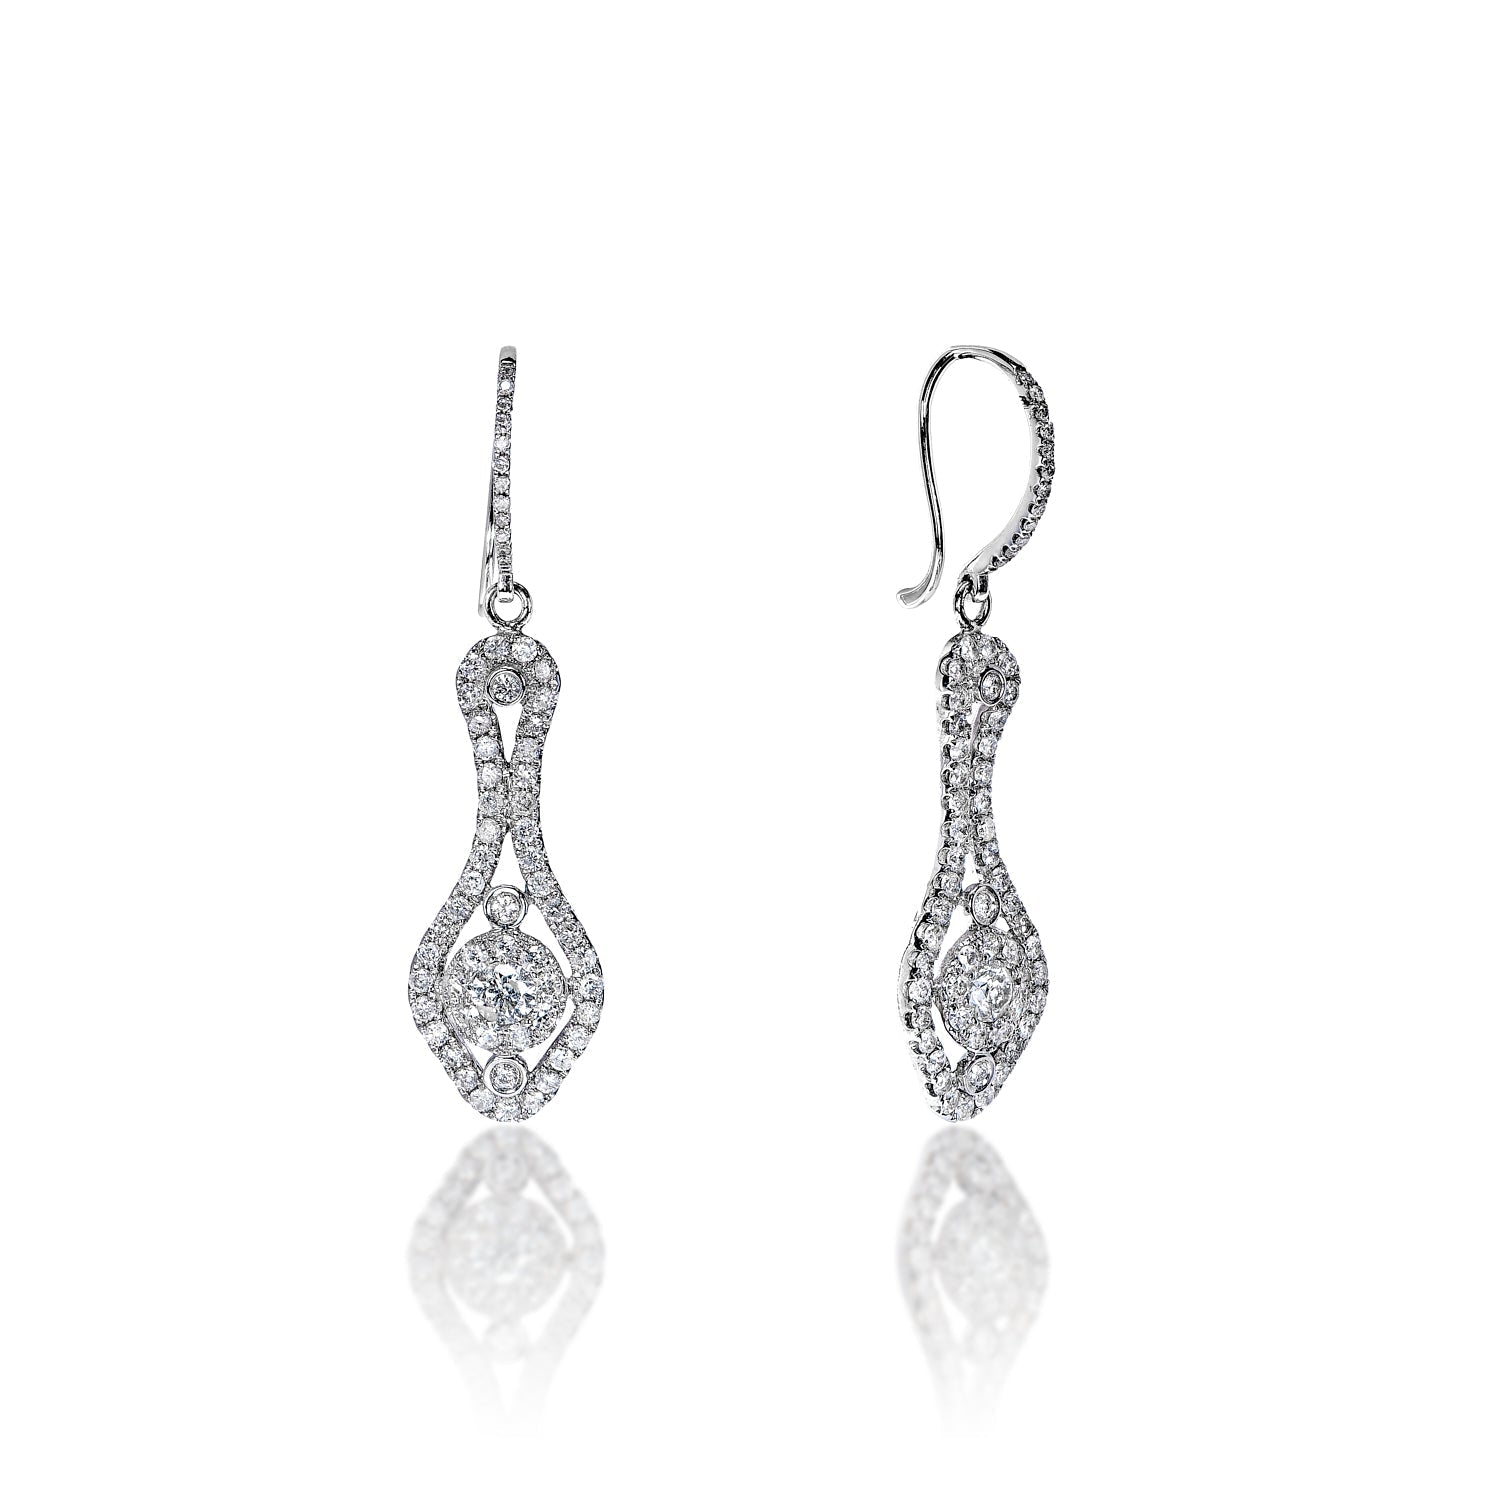 Fernanda 2 Carat Round Brilliant Diamond Shoulder Duster Earrings in 18k White Gold Front and Side View